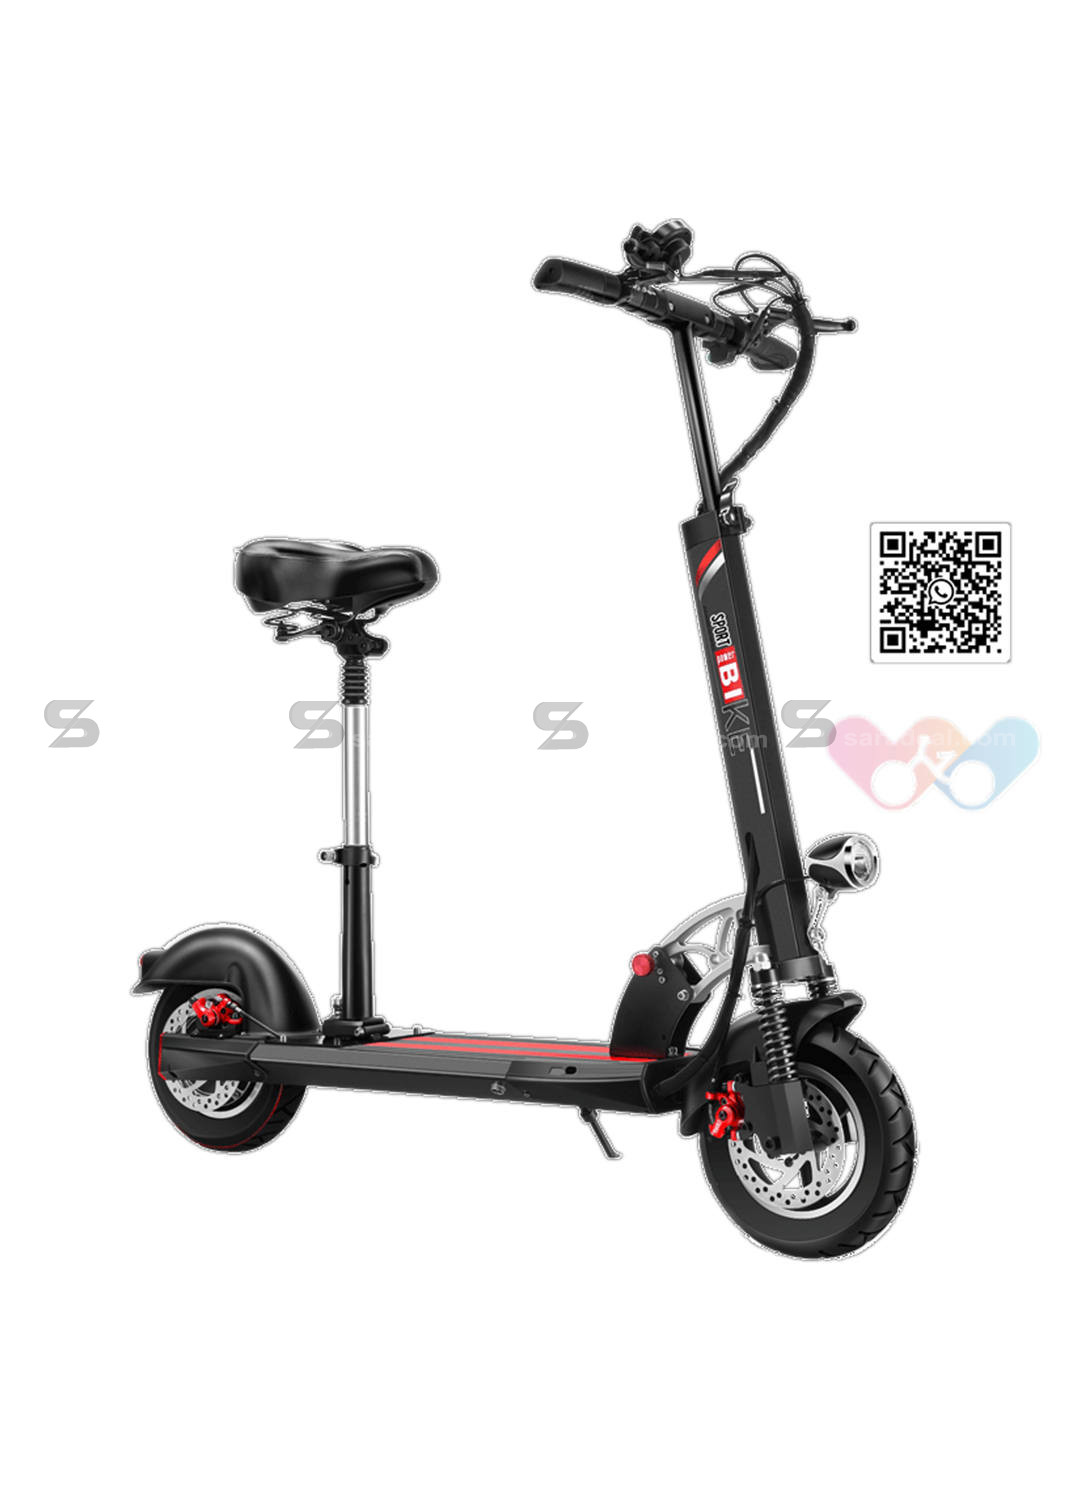 10-inch front shock absorber Electric scooter